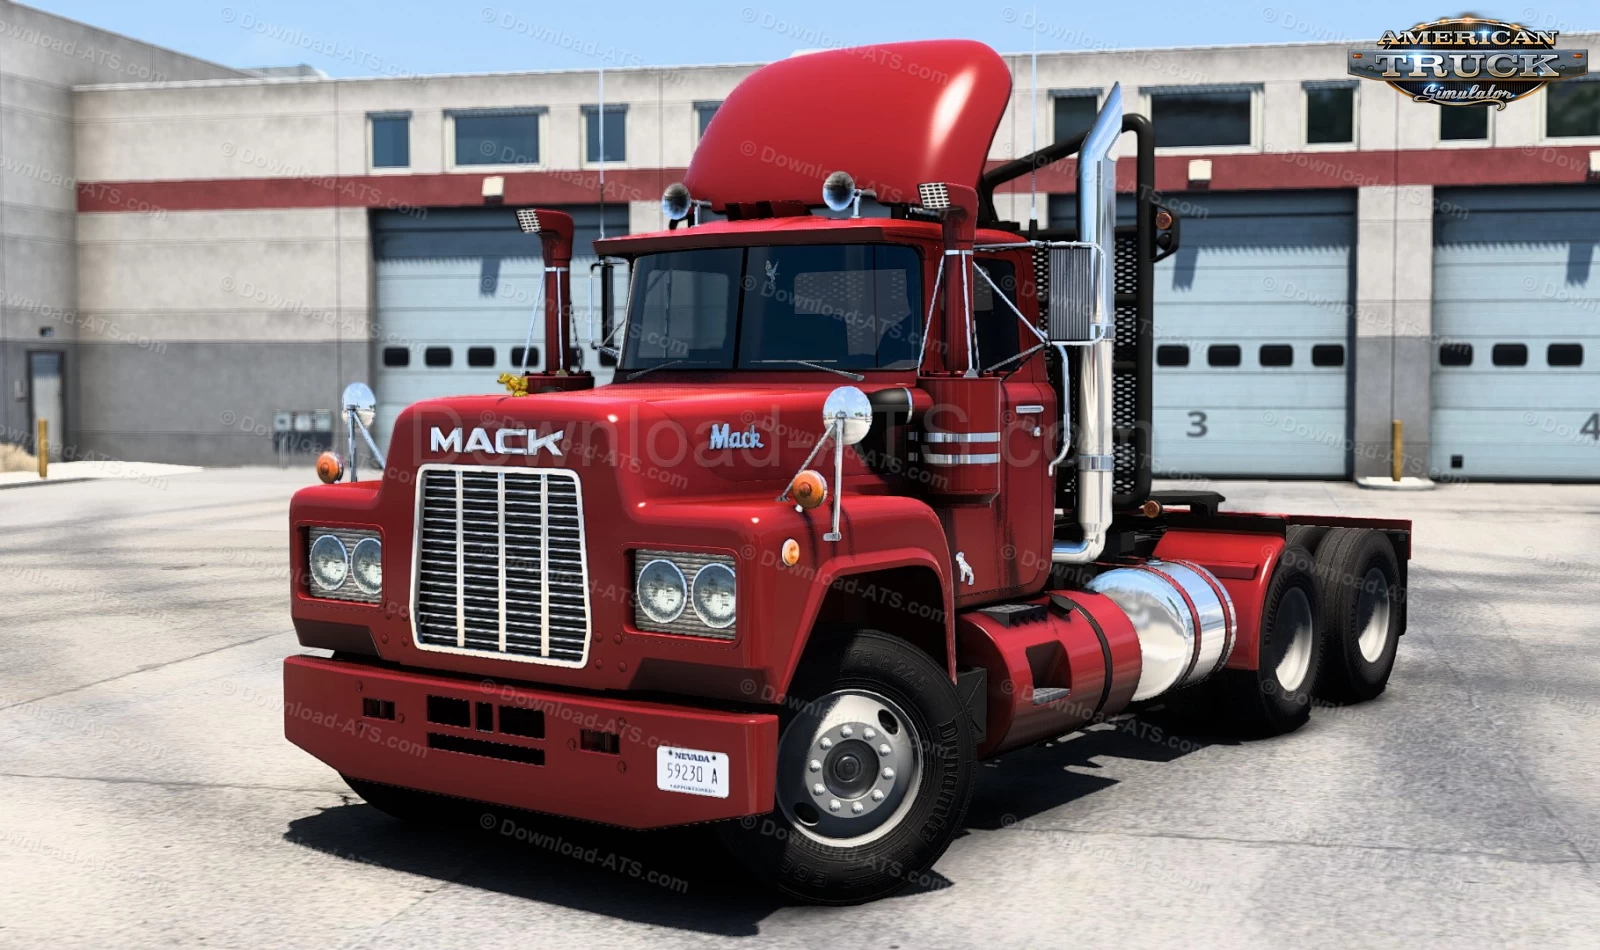 Mack R Series Truck v2.3 by Harven (1.45.x) for ATS